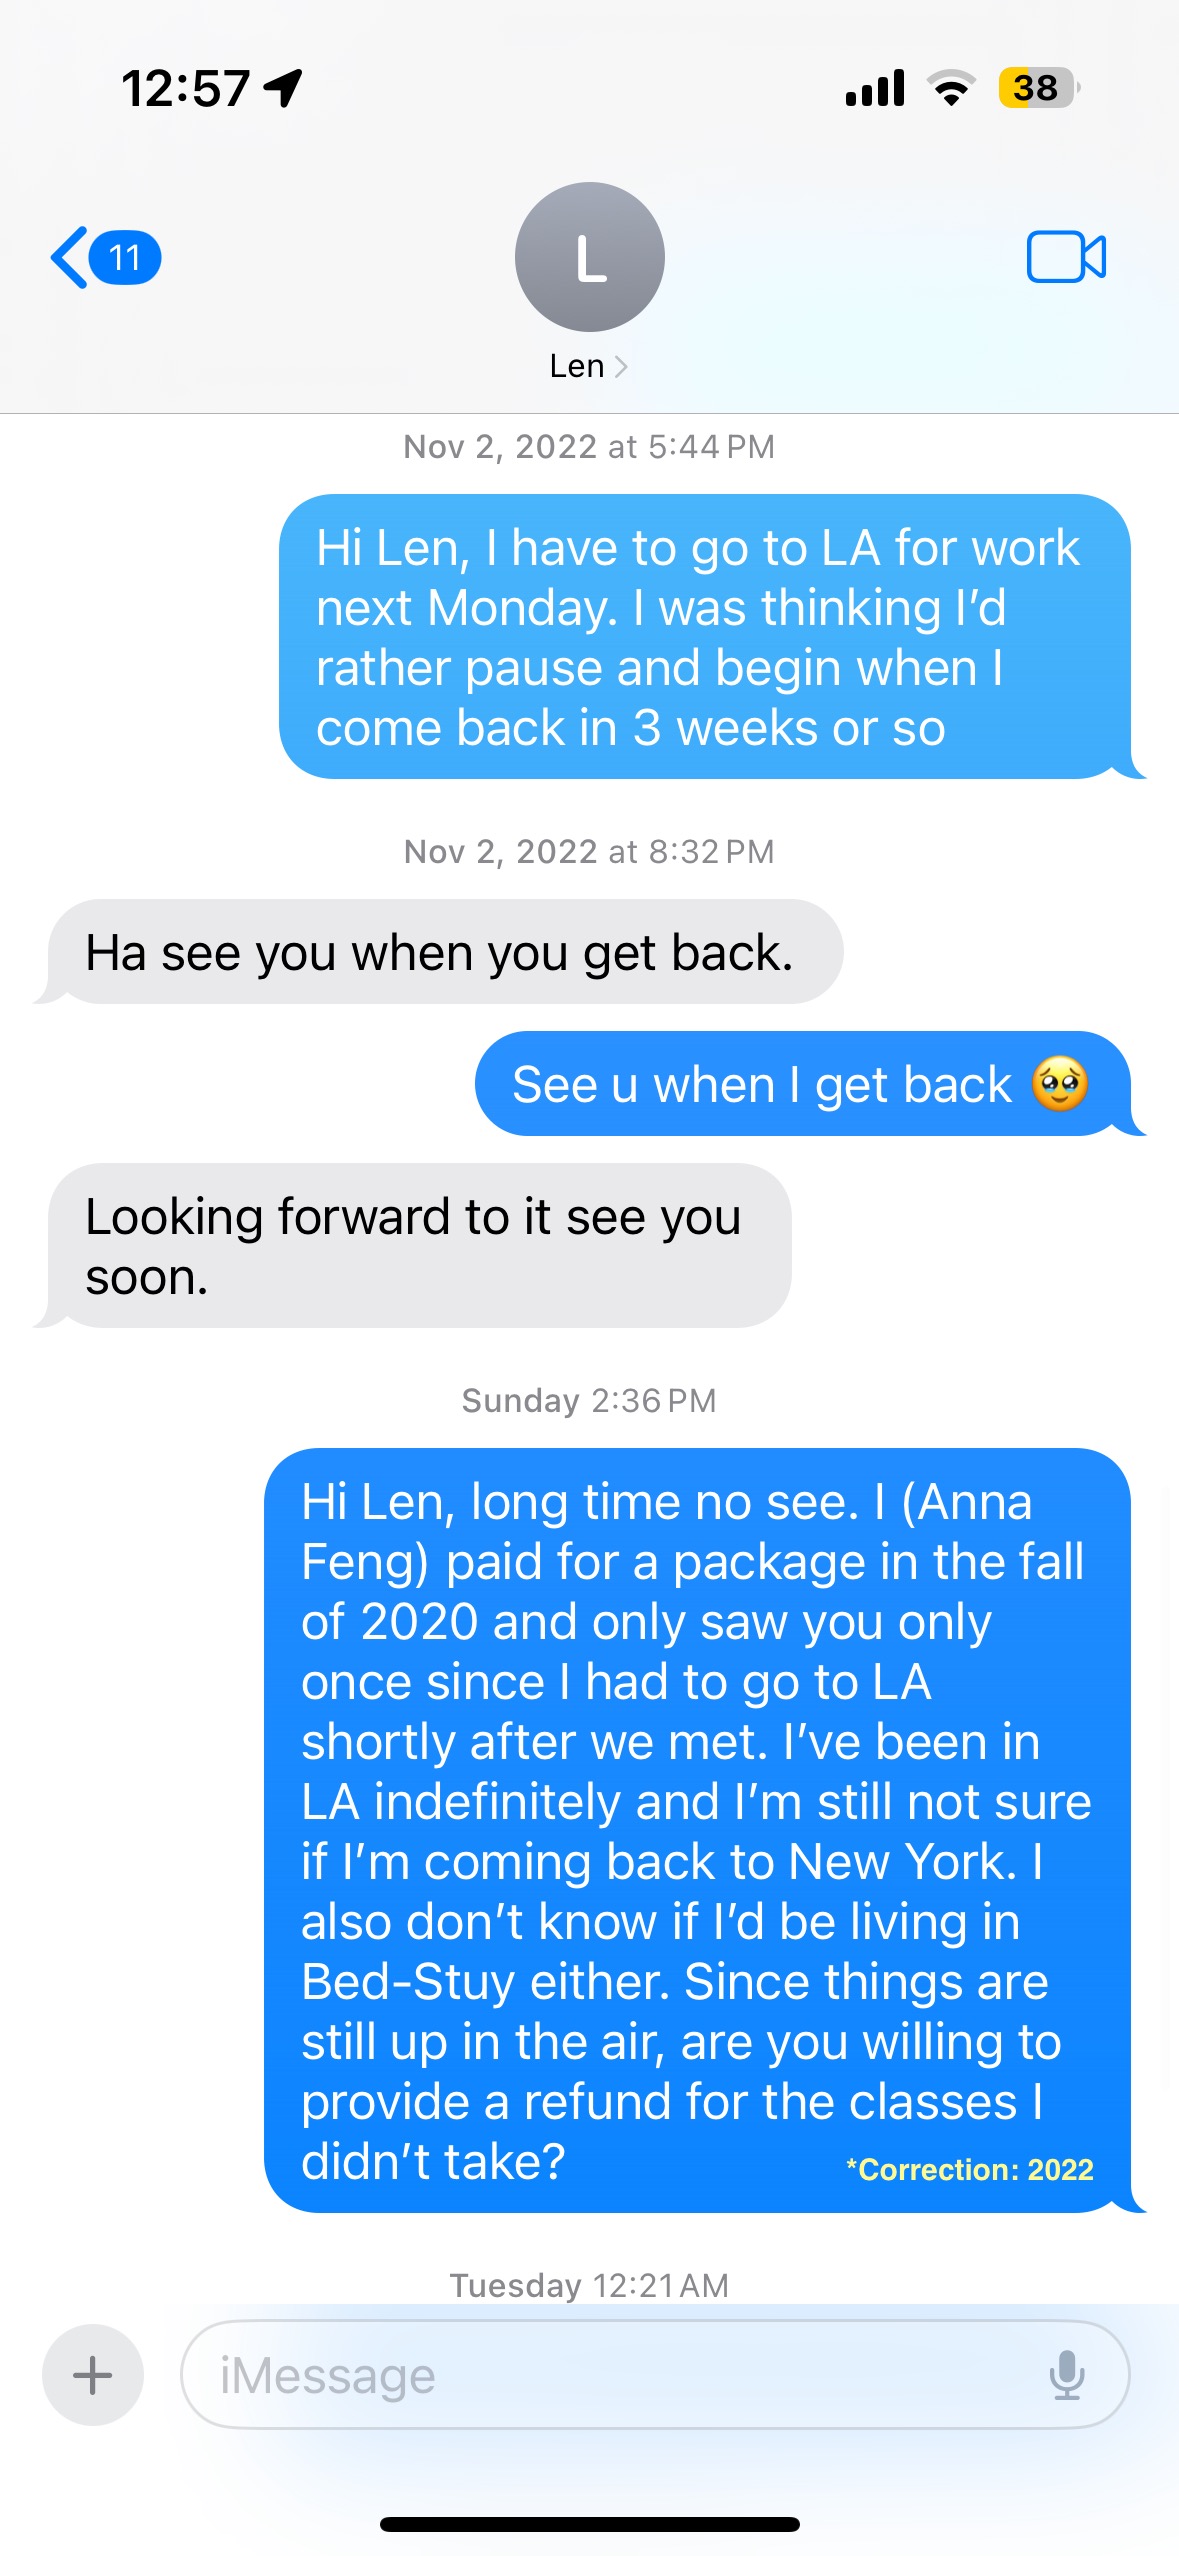 Len3a Len agreed to a pause in my personal training sessions but will not answer me calls after I resumed contact Brooklyn NY...